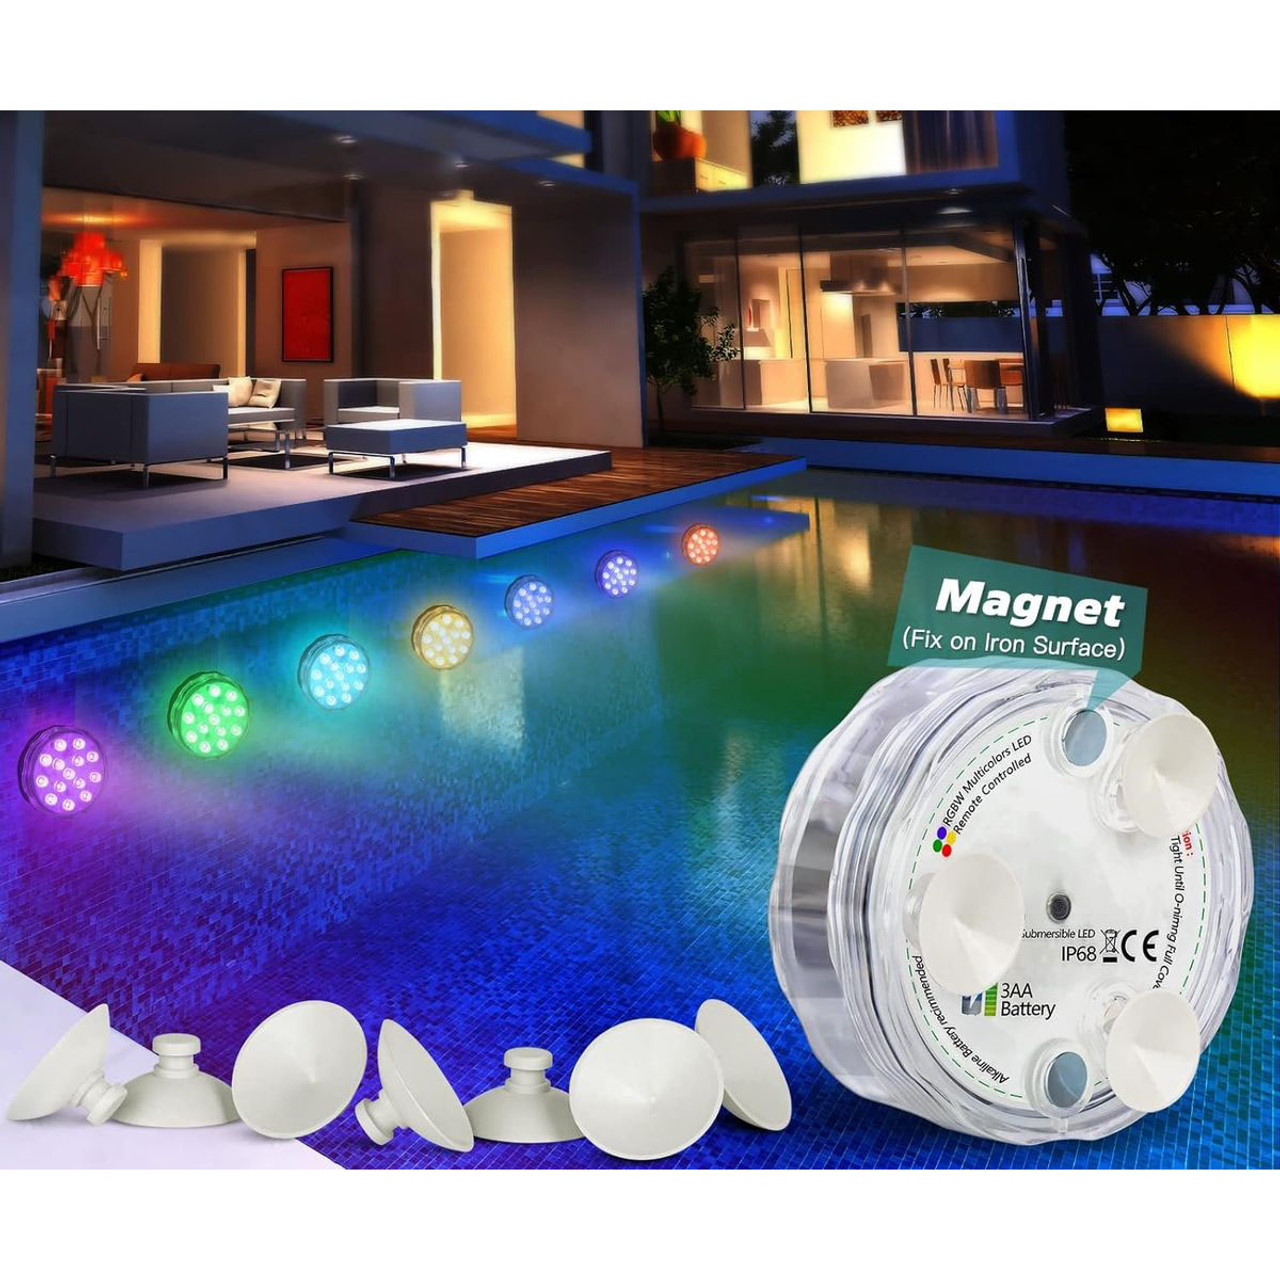 Submersible RGB LED Pool Light with 16 Colors and Suction Cups (1- to 3-Pack) product image